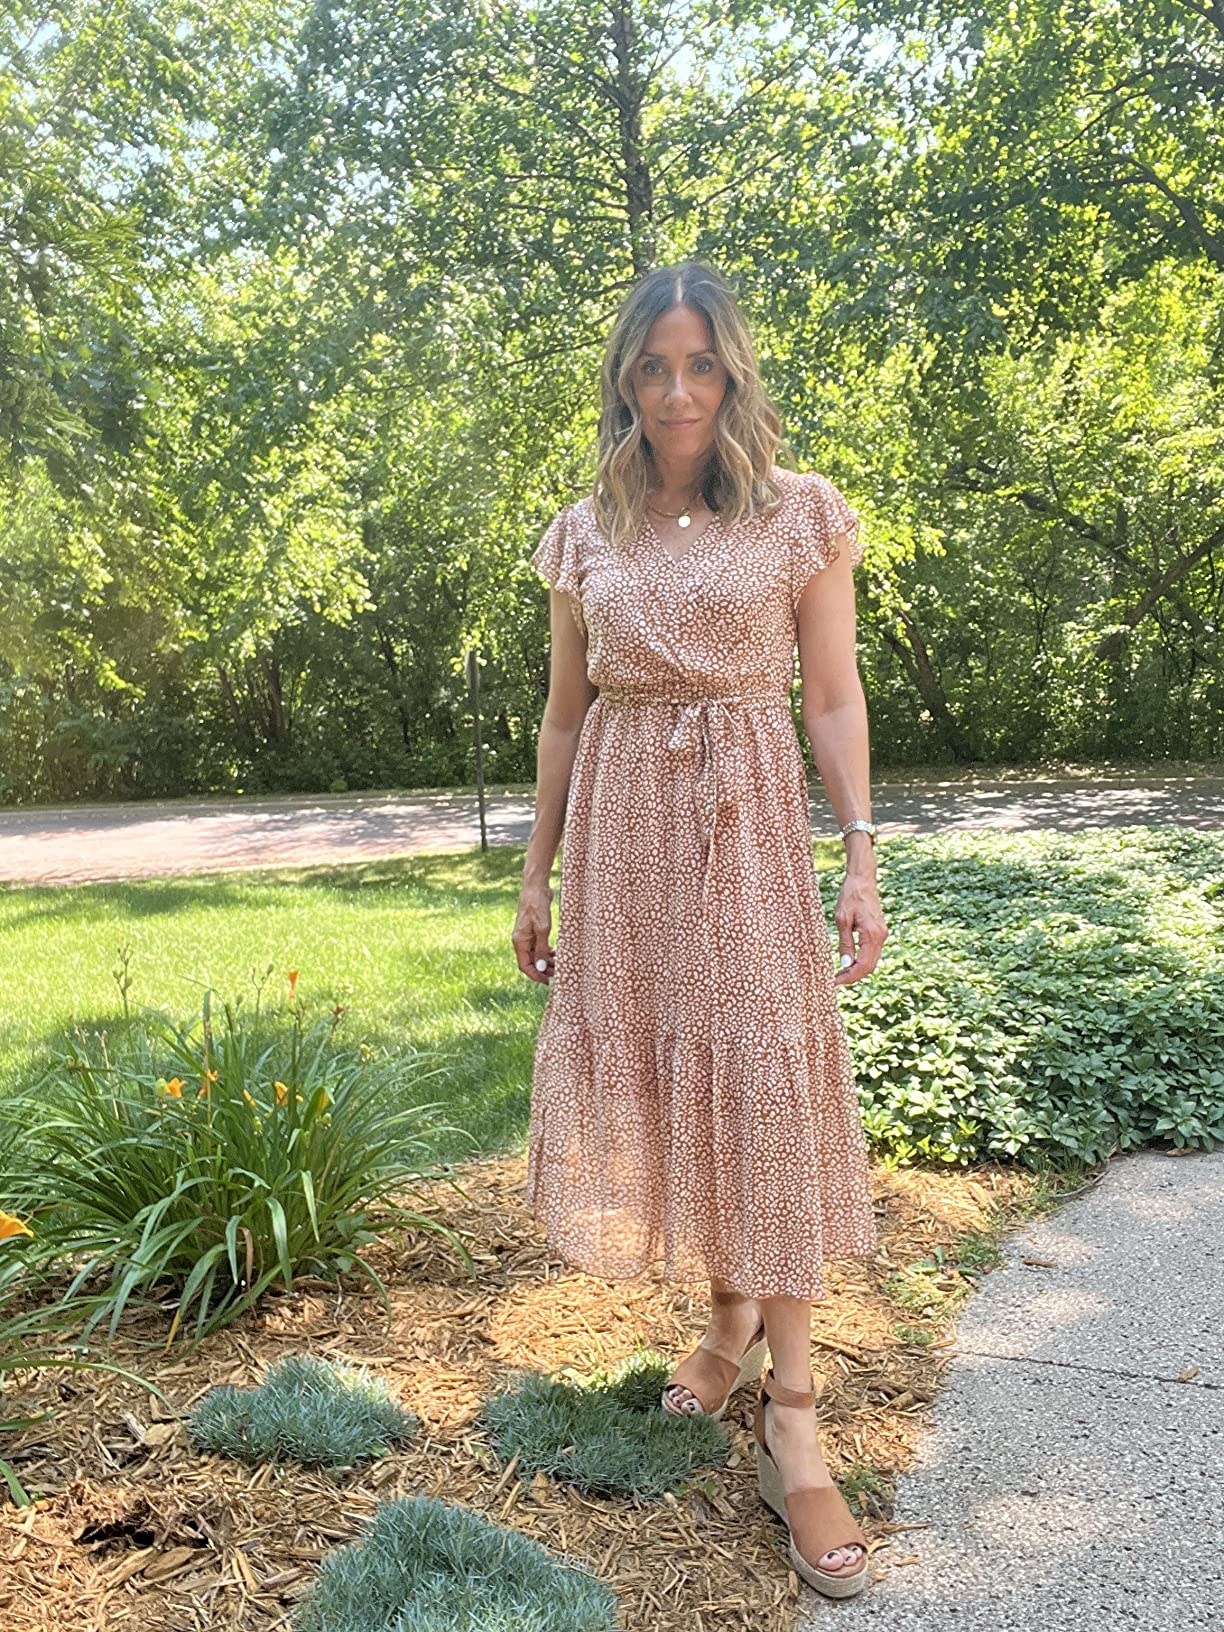 Reviewer standing in front of garden patch in the brown polka dot dress with wedge sandals